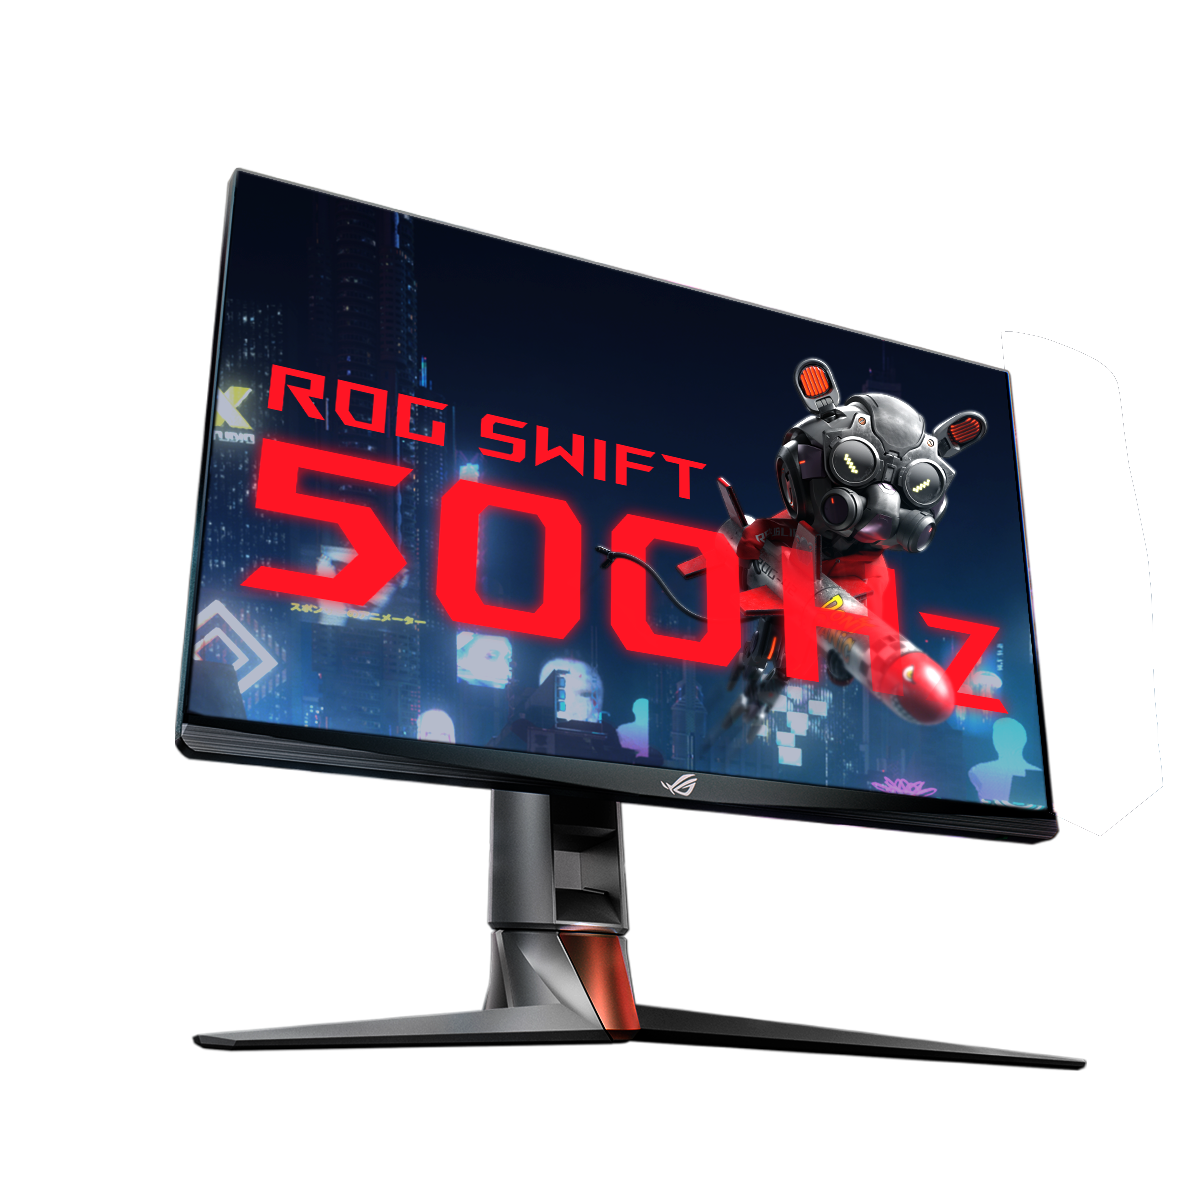 ROG Swift Monitor Offers a World First 360Hz Refresh Rate